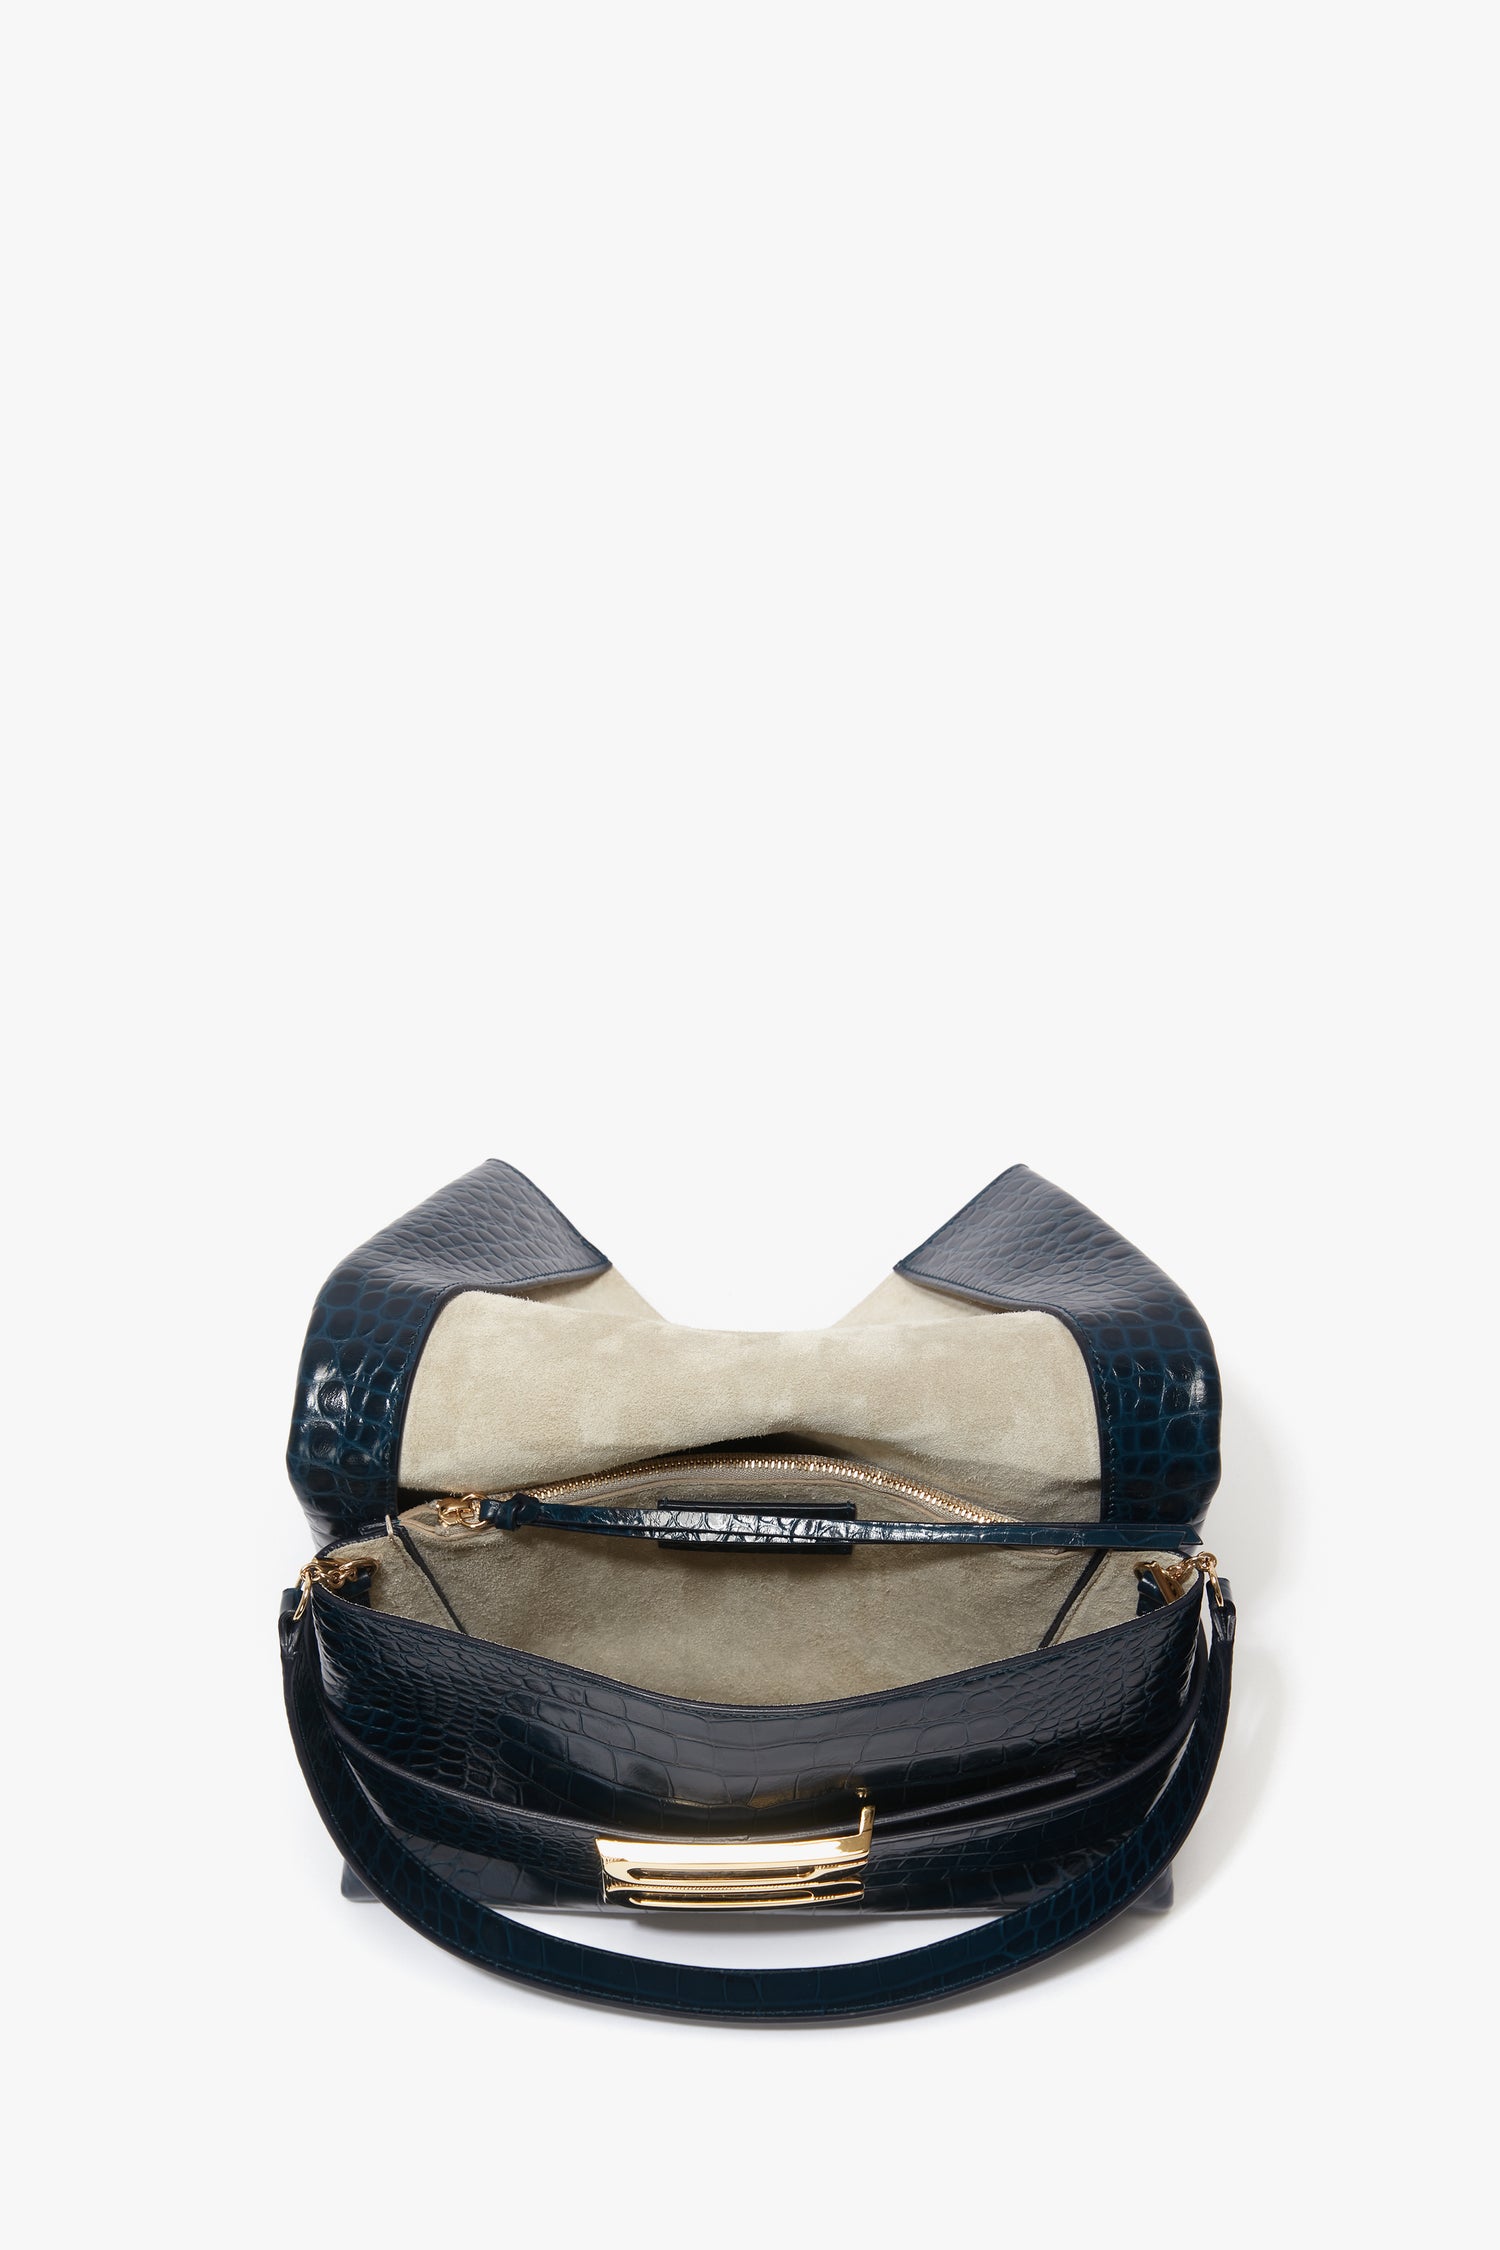 Open the B Pouch Bag In Croc Effect Midnight Blue Leather by Victoria Beckham, revealing an inner-lined pocket and zipper compartment. Comes with a detachable shoulder strap.